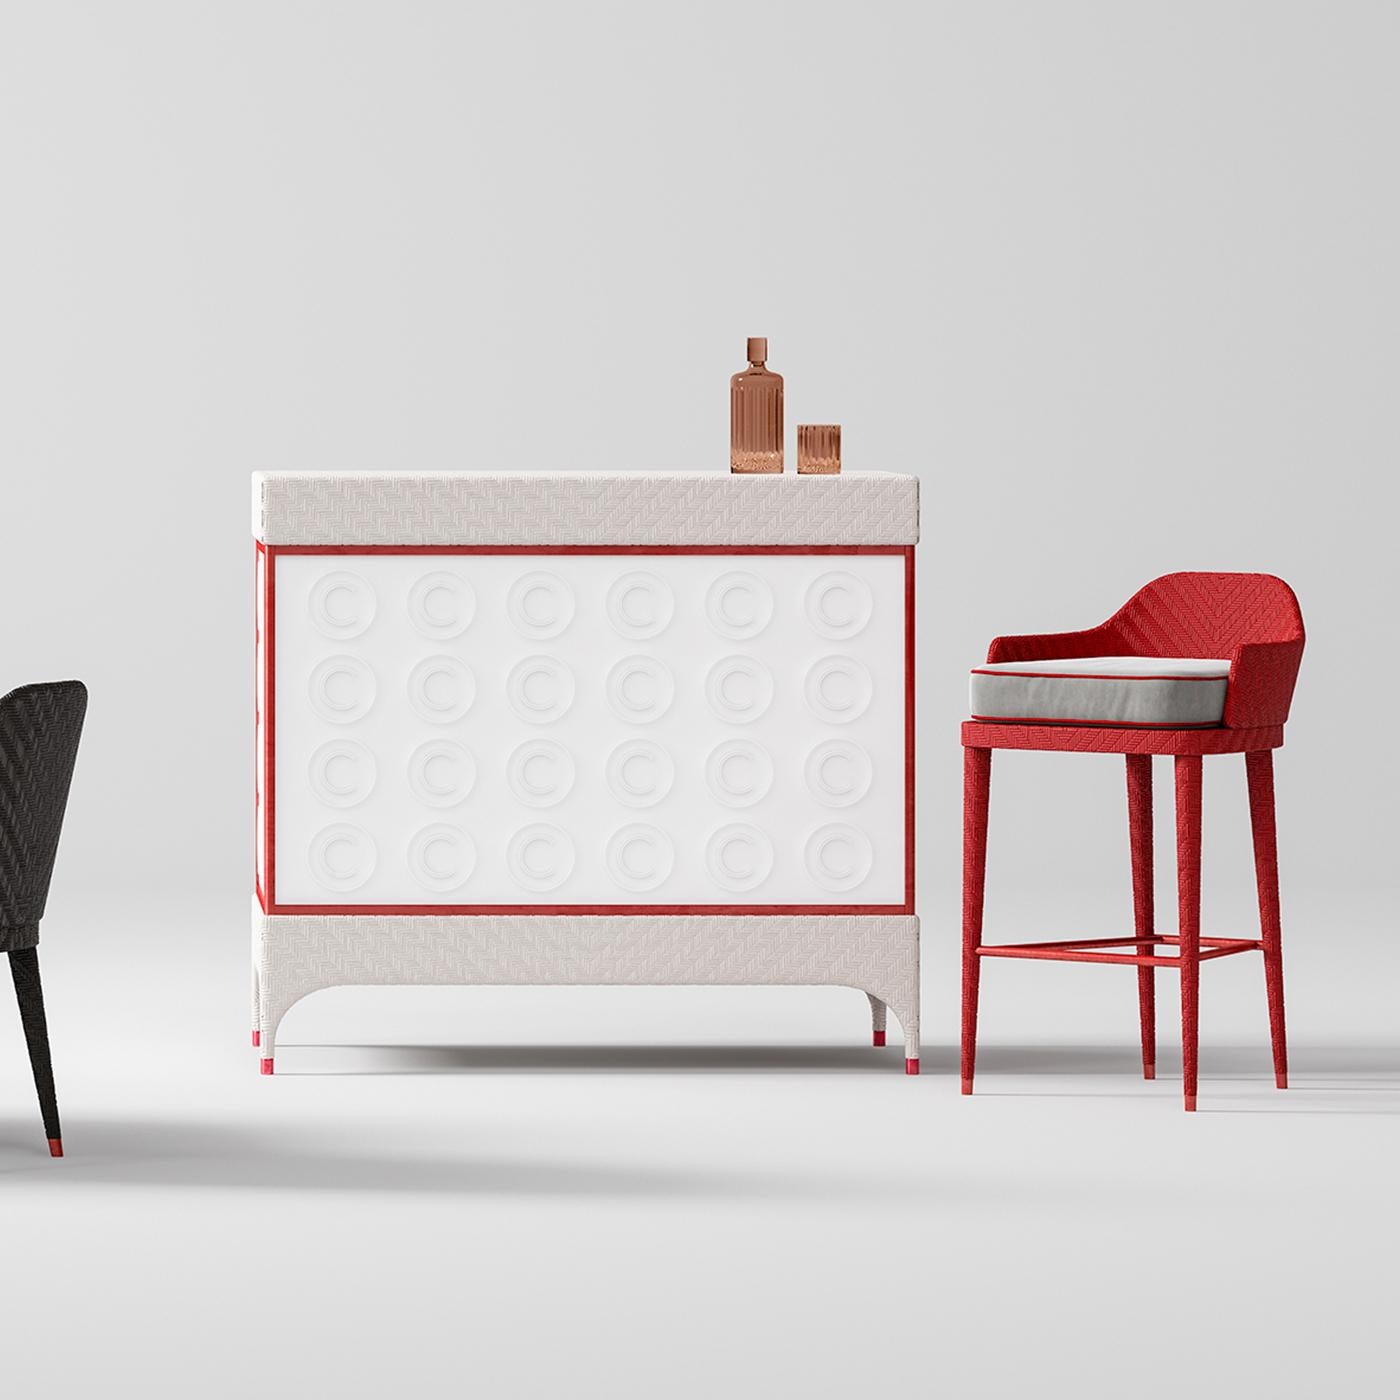 An elegant design that combines functionality and visual appeal, this bar cabinet is the ultimate accessory for any outdoor decor. Constructed on an aluminum frame covered with handwoven resin, the compact white silhouette features red profiles